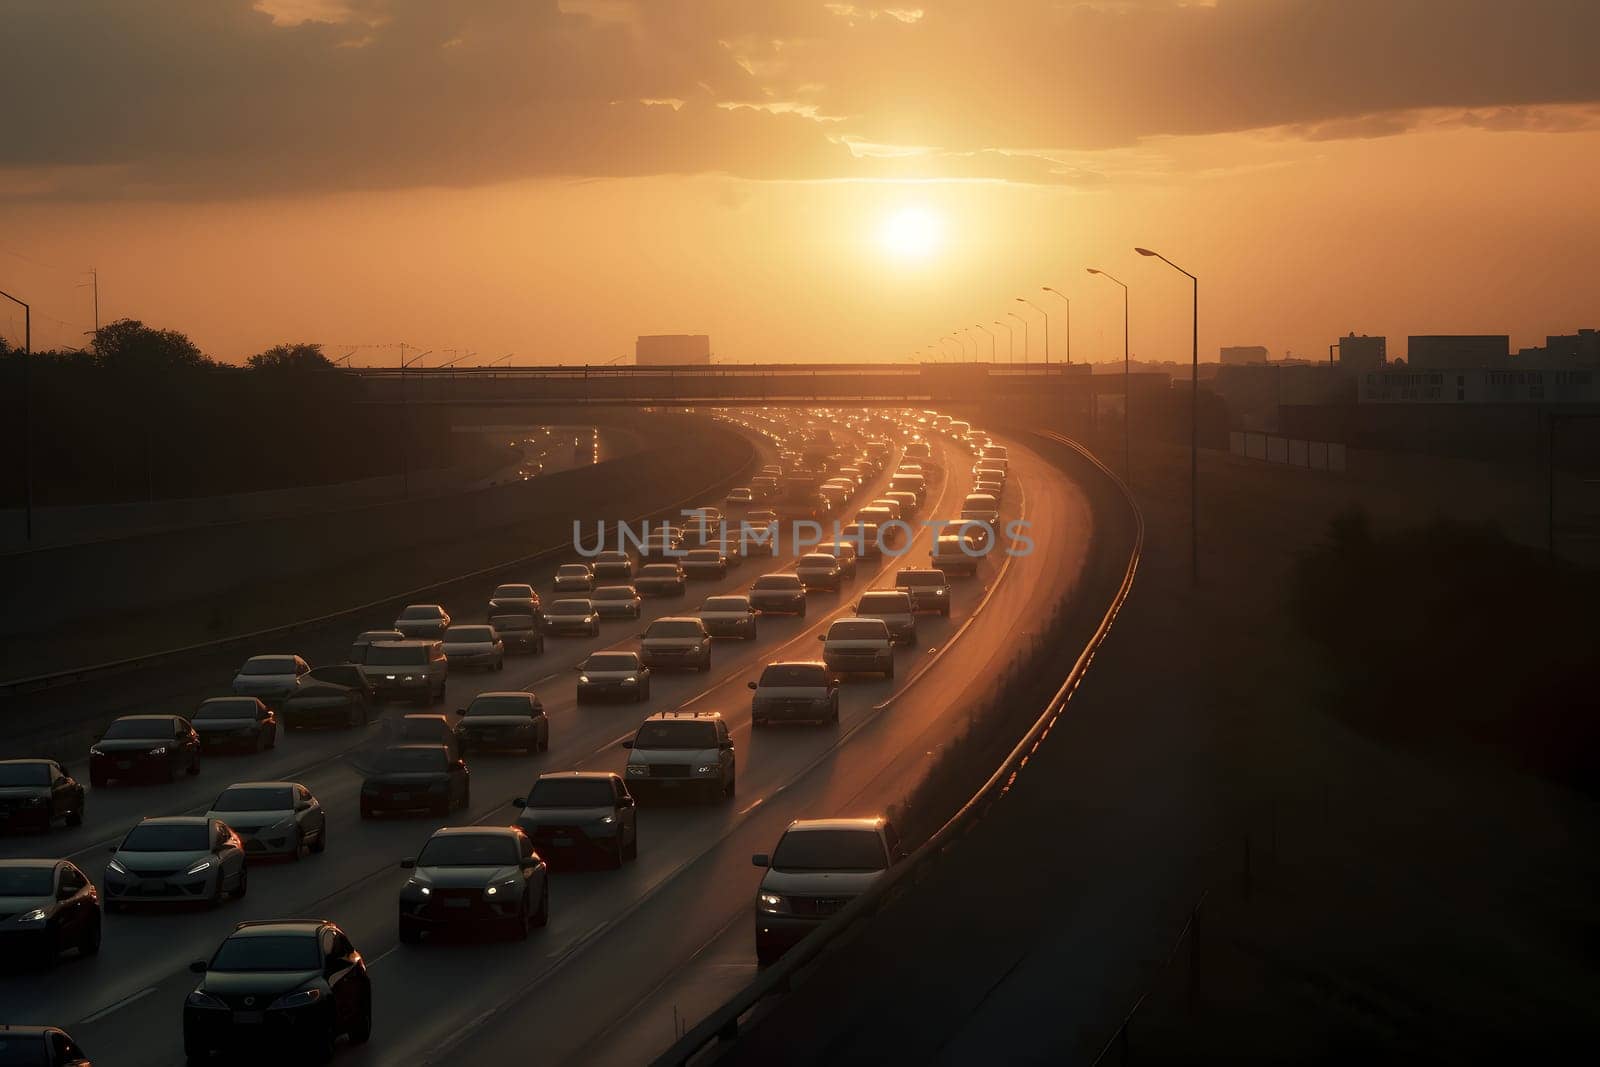 highway traffic in sunrise or sunset, neural network generated photorealistic image by z1b